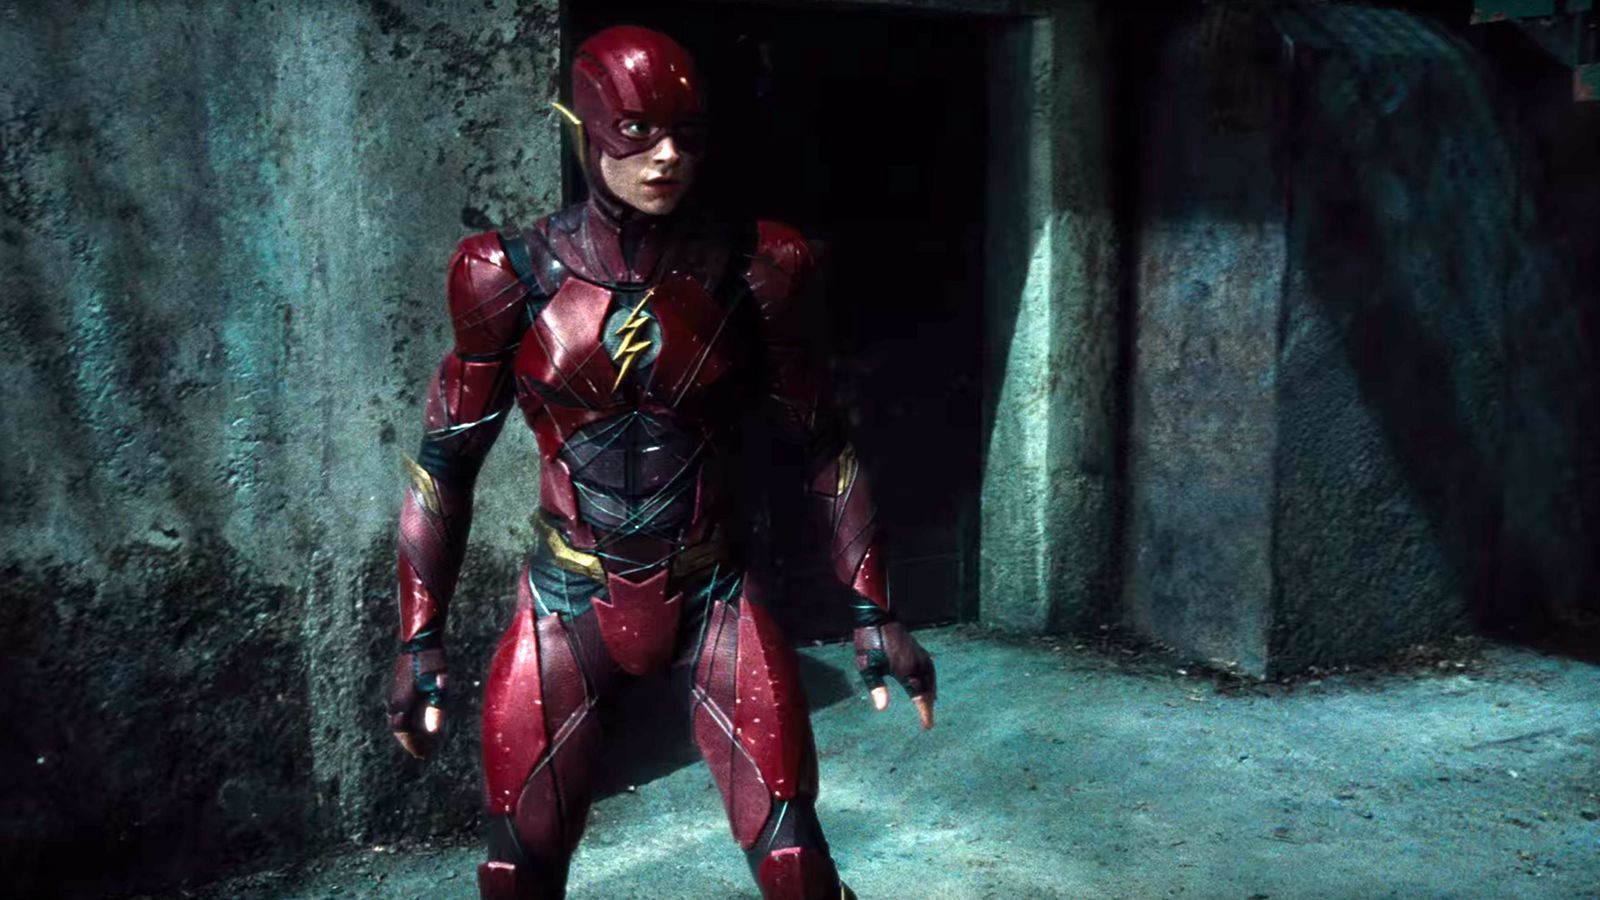 DC's Extended Universe Will Rely Heavily On Flashbacks, Flash Forwards In Future Movies